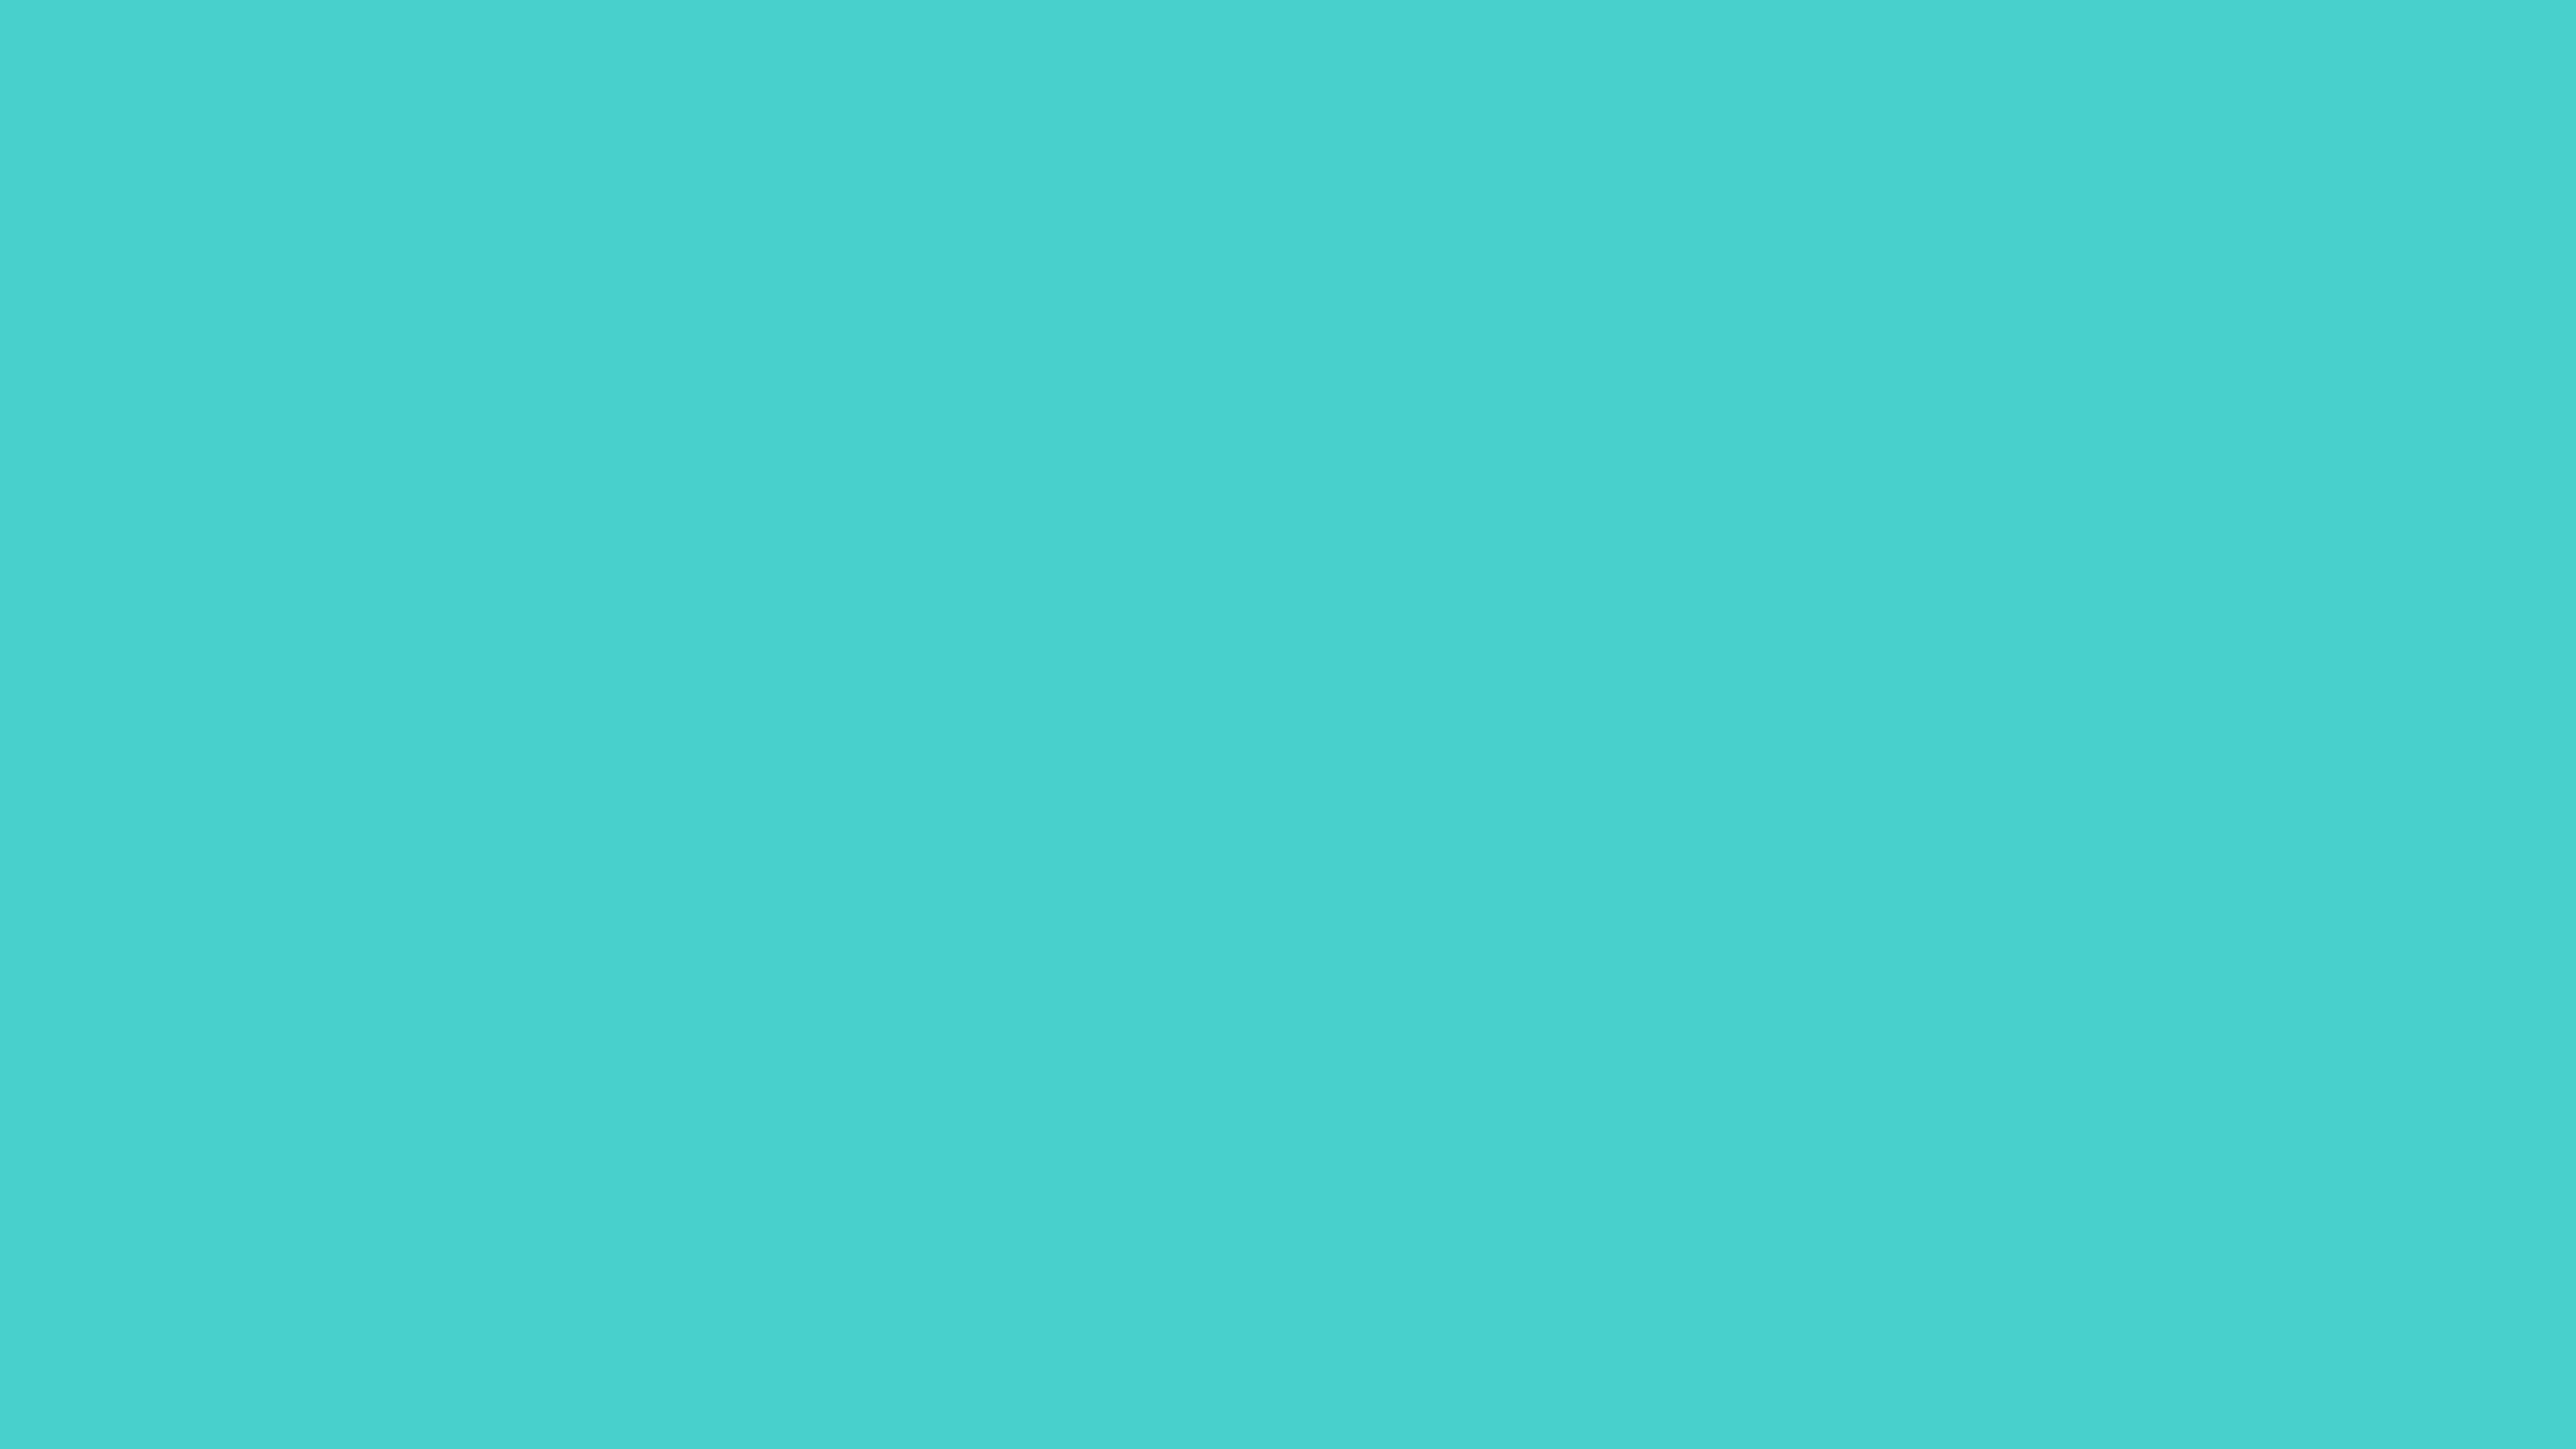 7680x4320 Medium Turquoise Solid Color Background